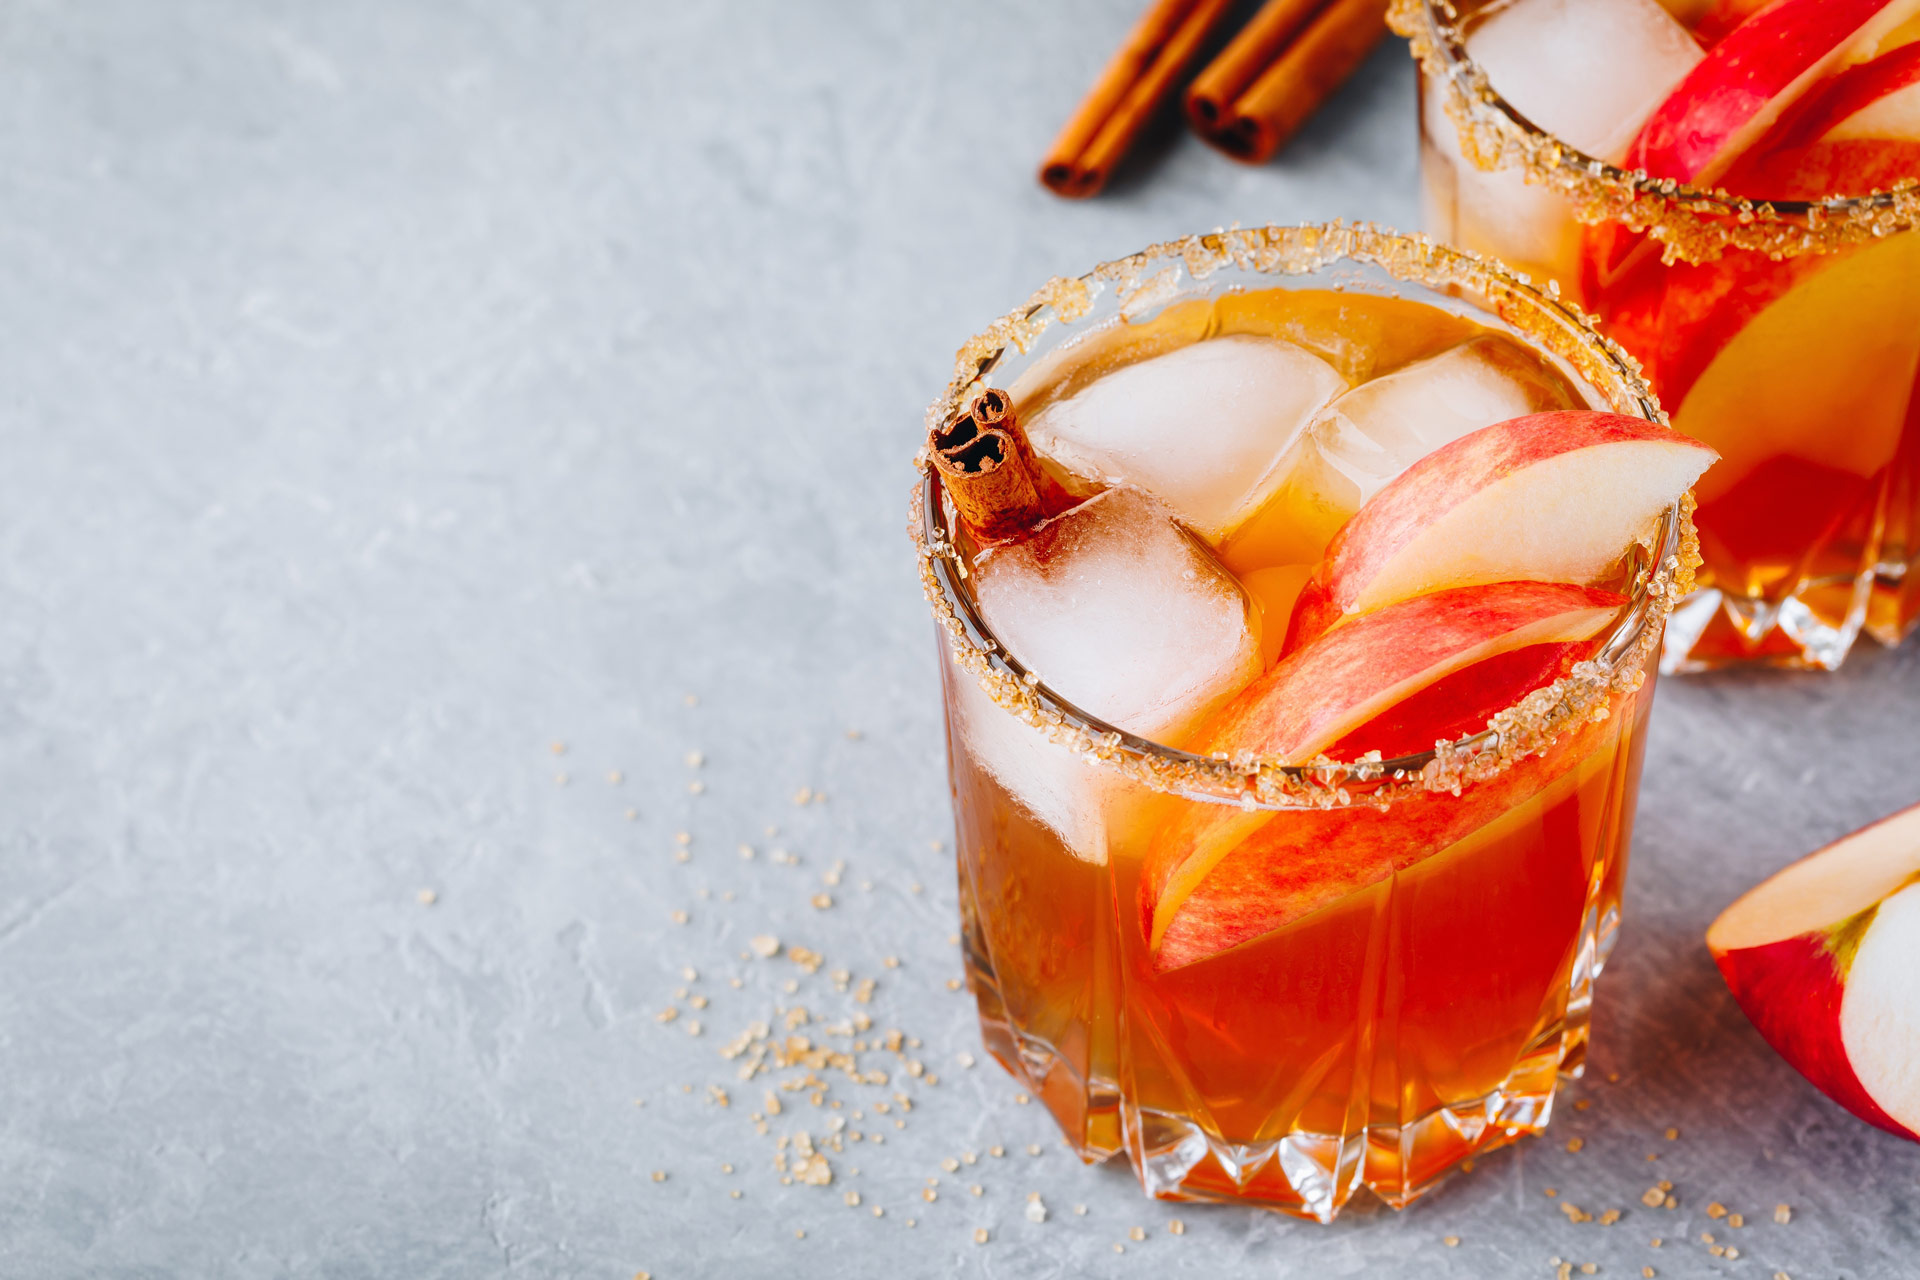 8 Frightfully Tasty Halloween Cocktails to Try at Home